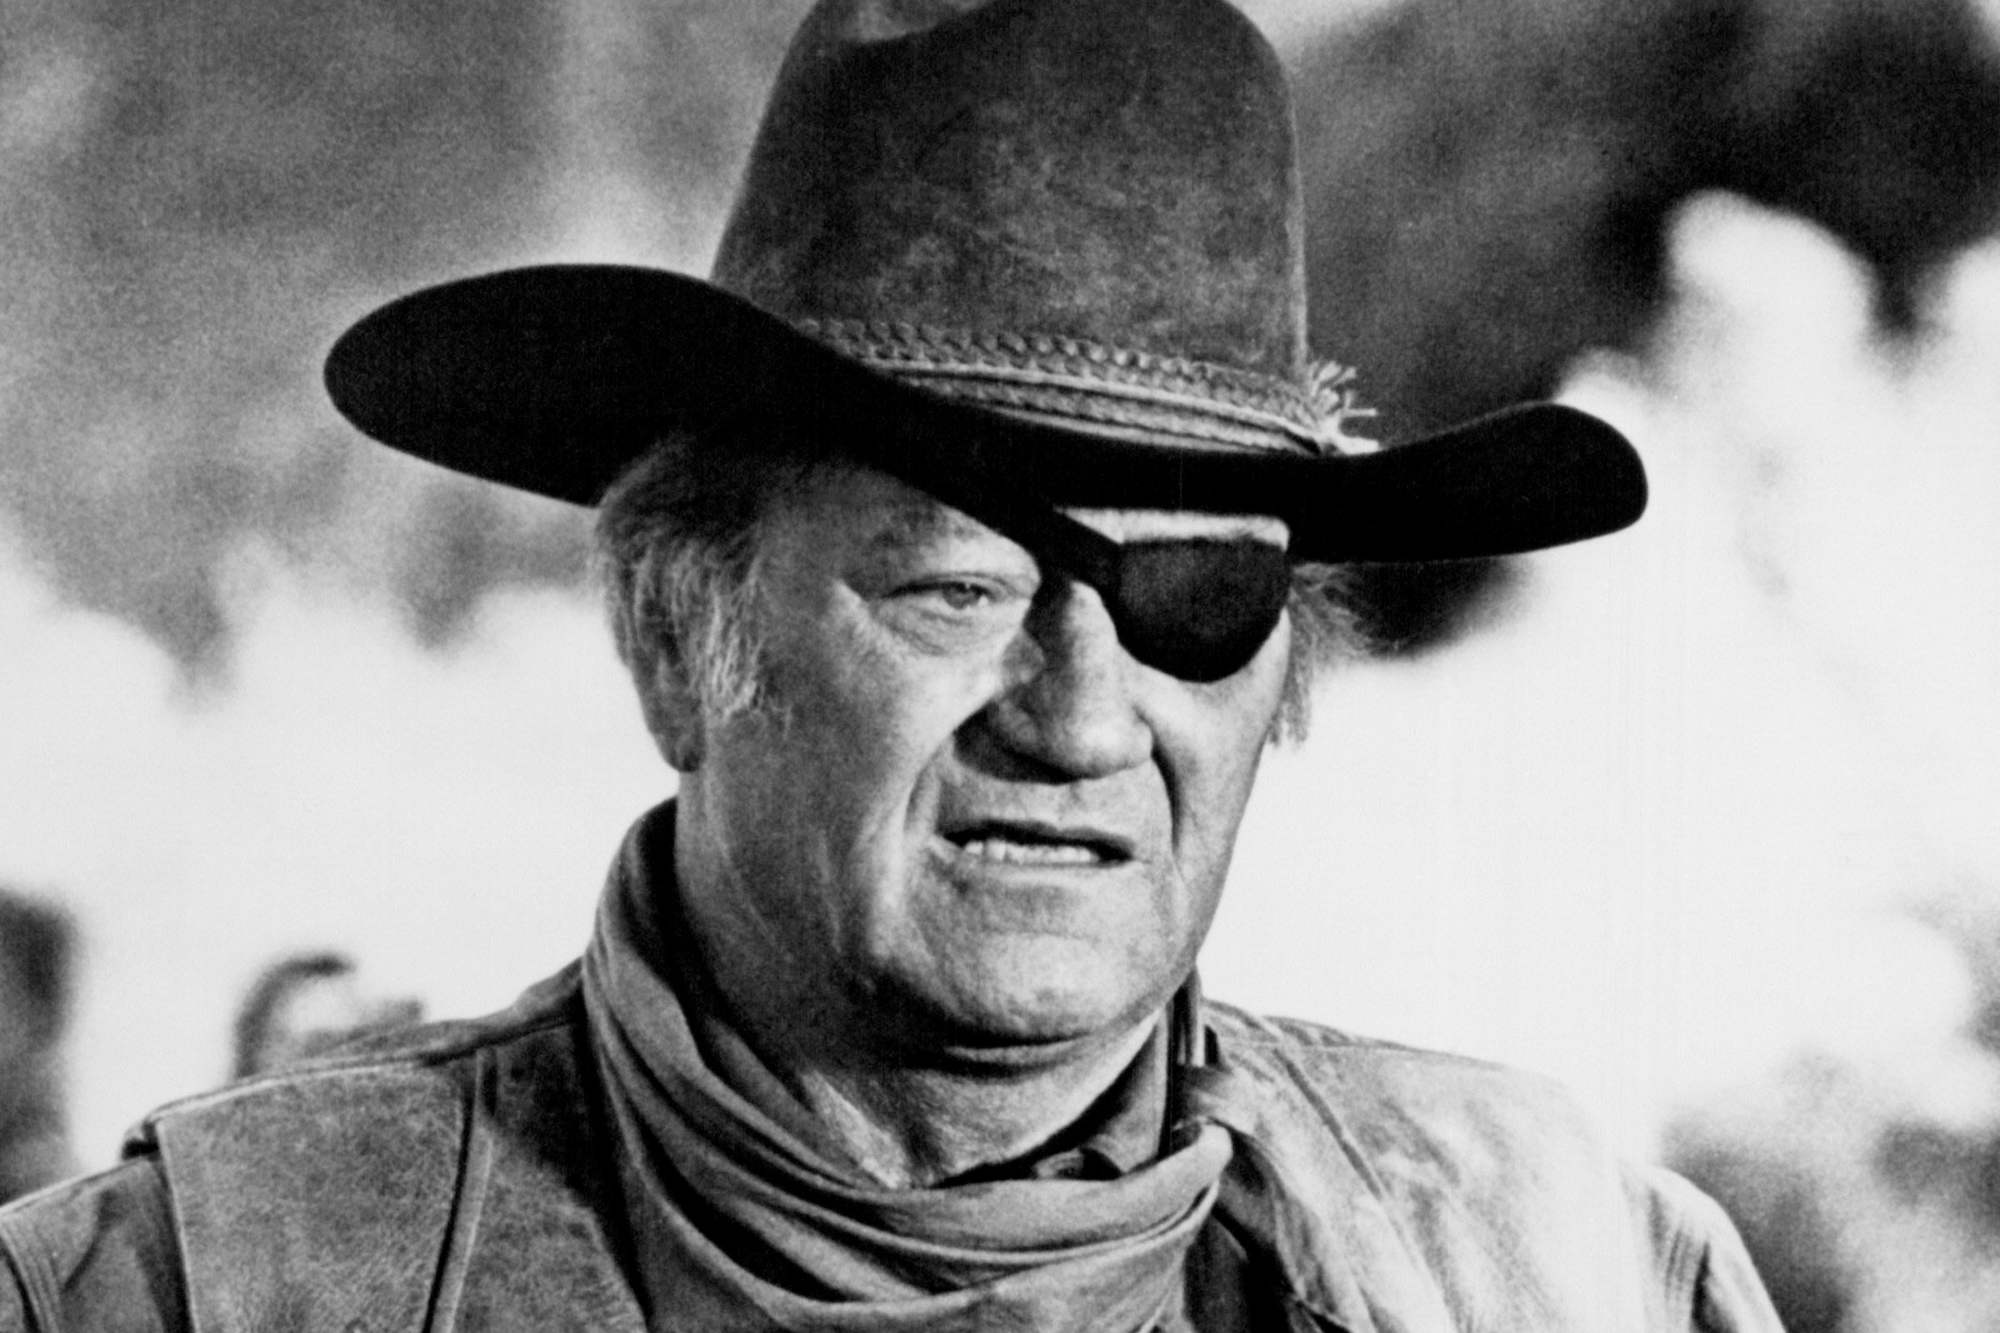 'Rio Bravo' star John Wayne playing Rooster Cogburn in 'Rio Bravo' with his mouth slightly opened wearing an eye patch and Western hat